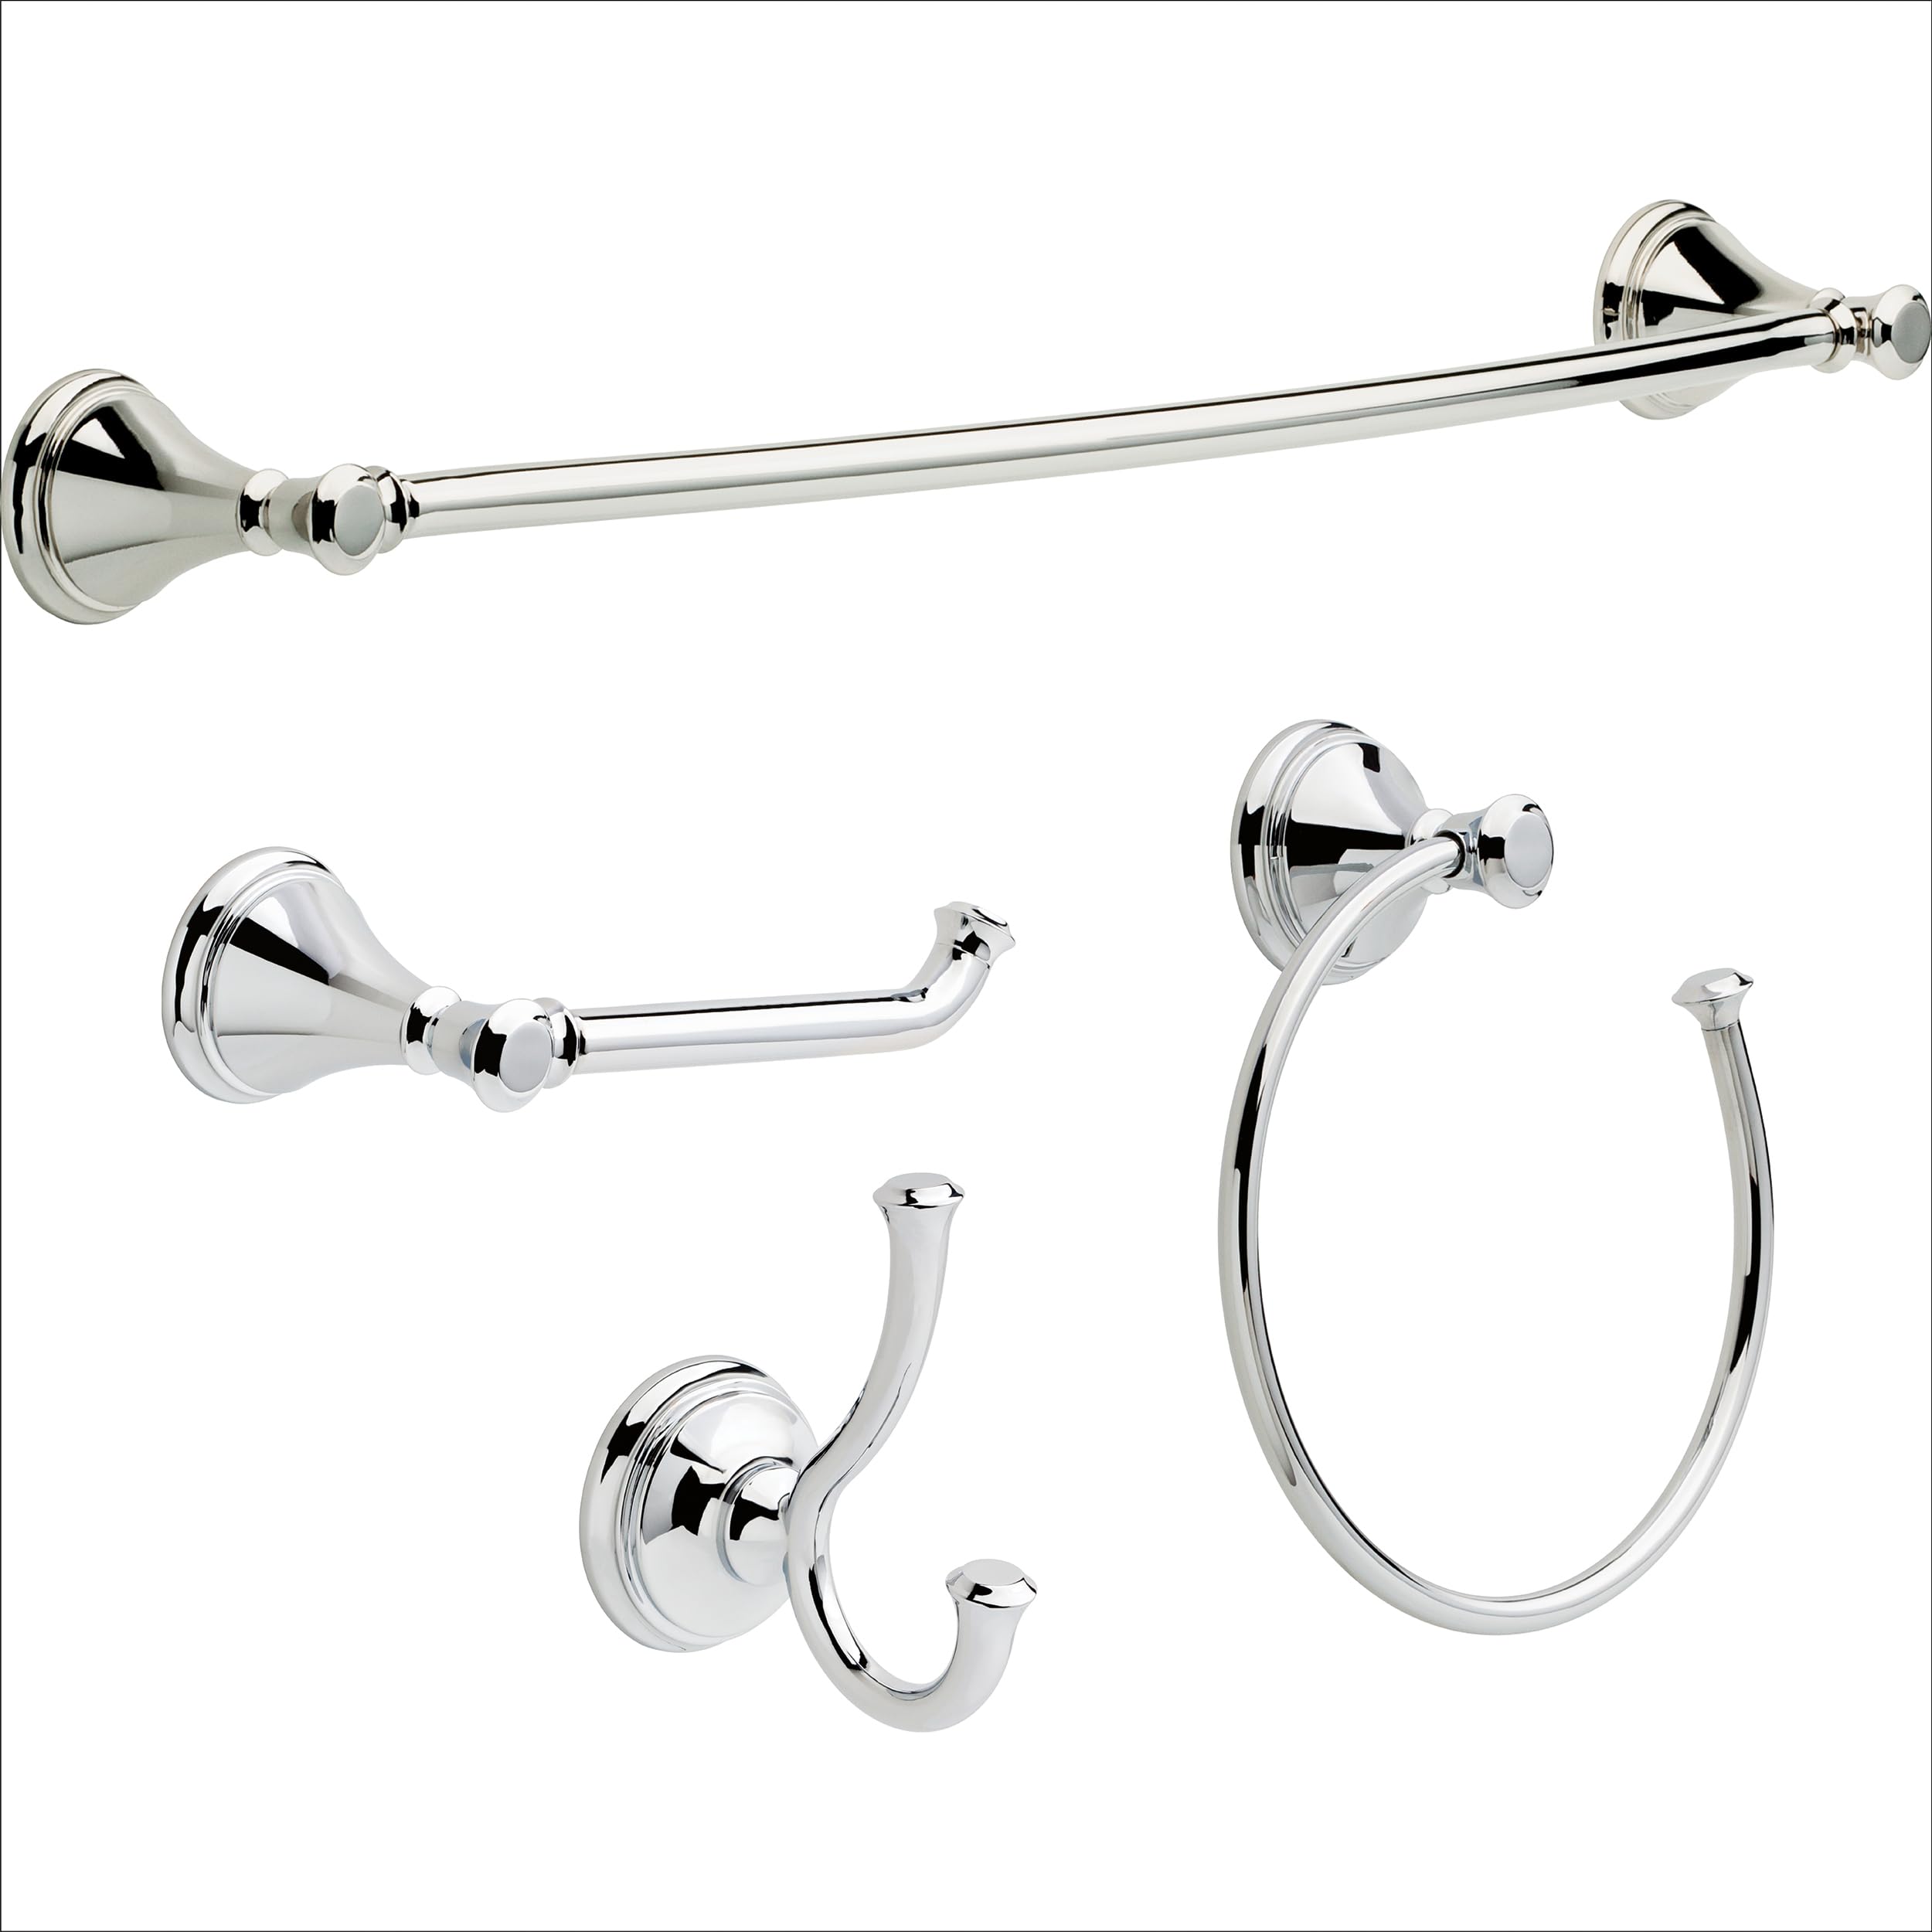 Delta Cassidy 4-Piece Bath Hardware Set with 24 in. Towel Bar, Toilet Paper Holder, Towel Ring, Towel Hook in Polished Chrome